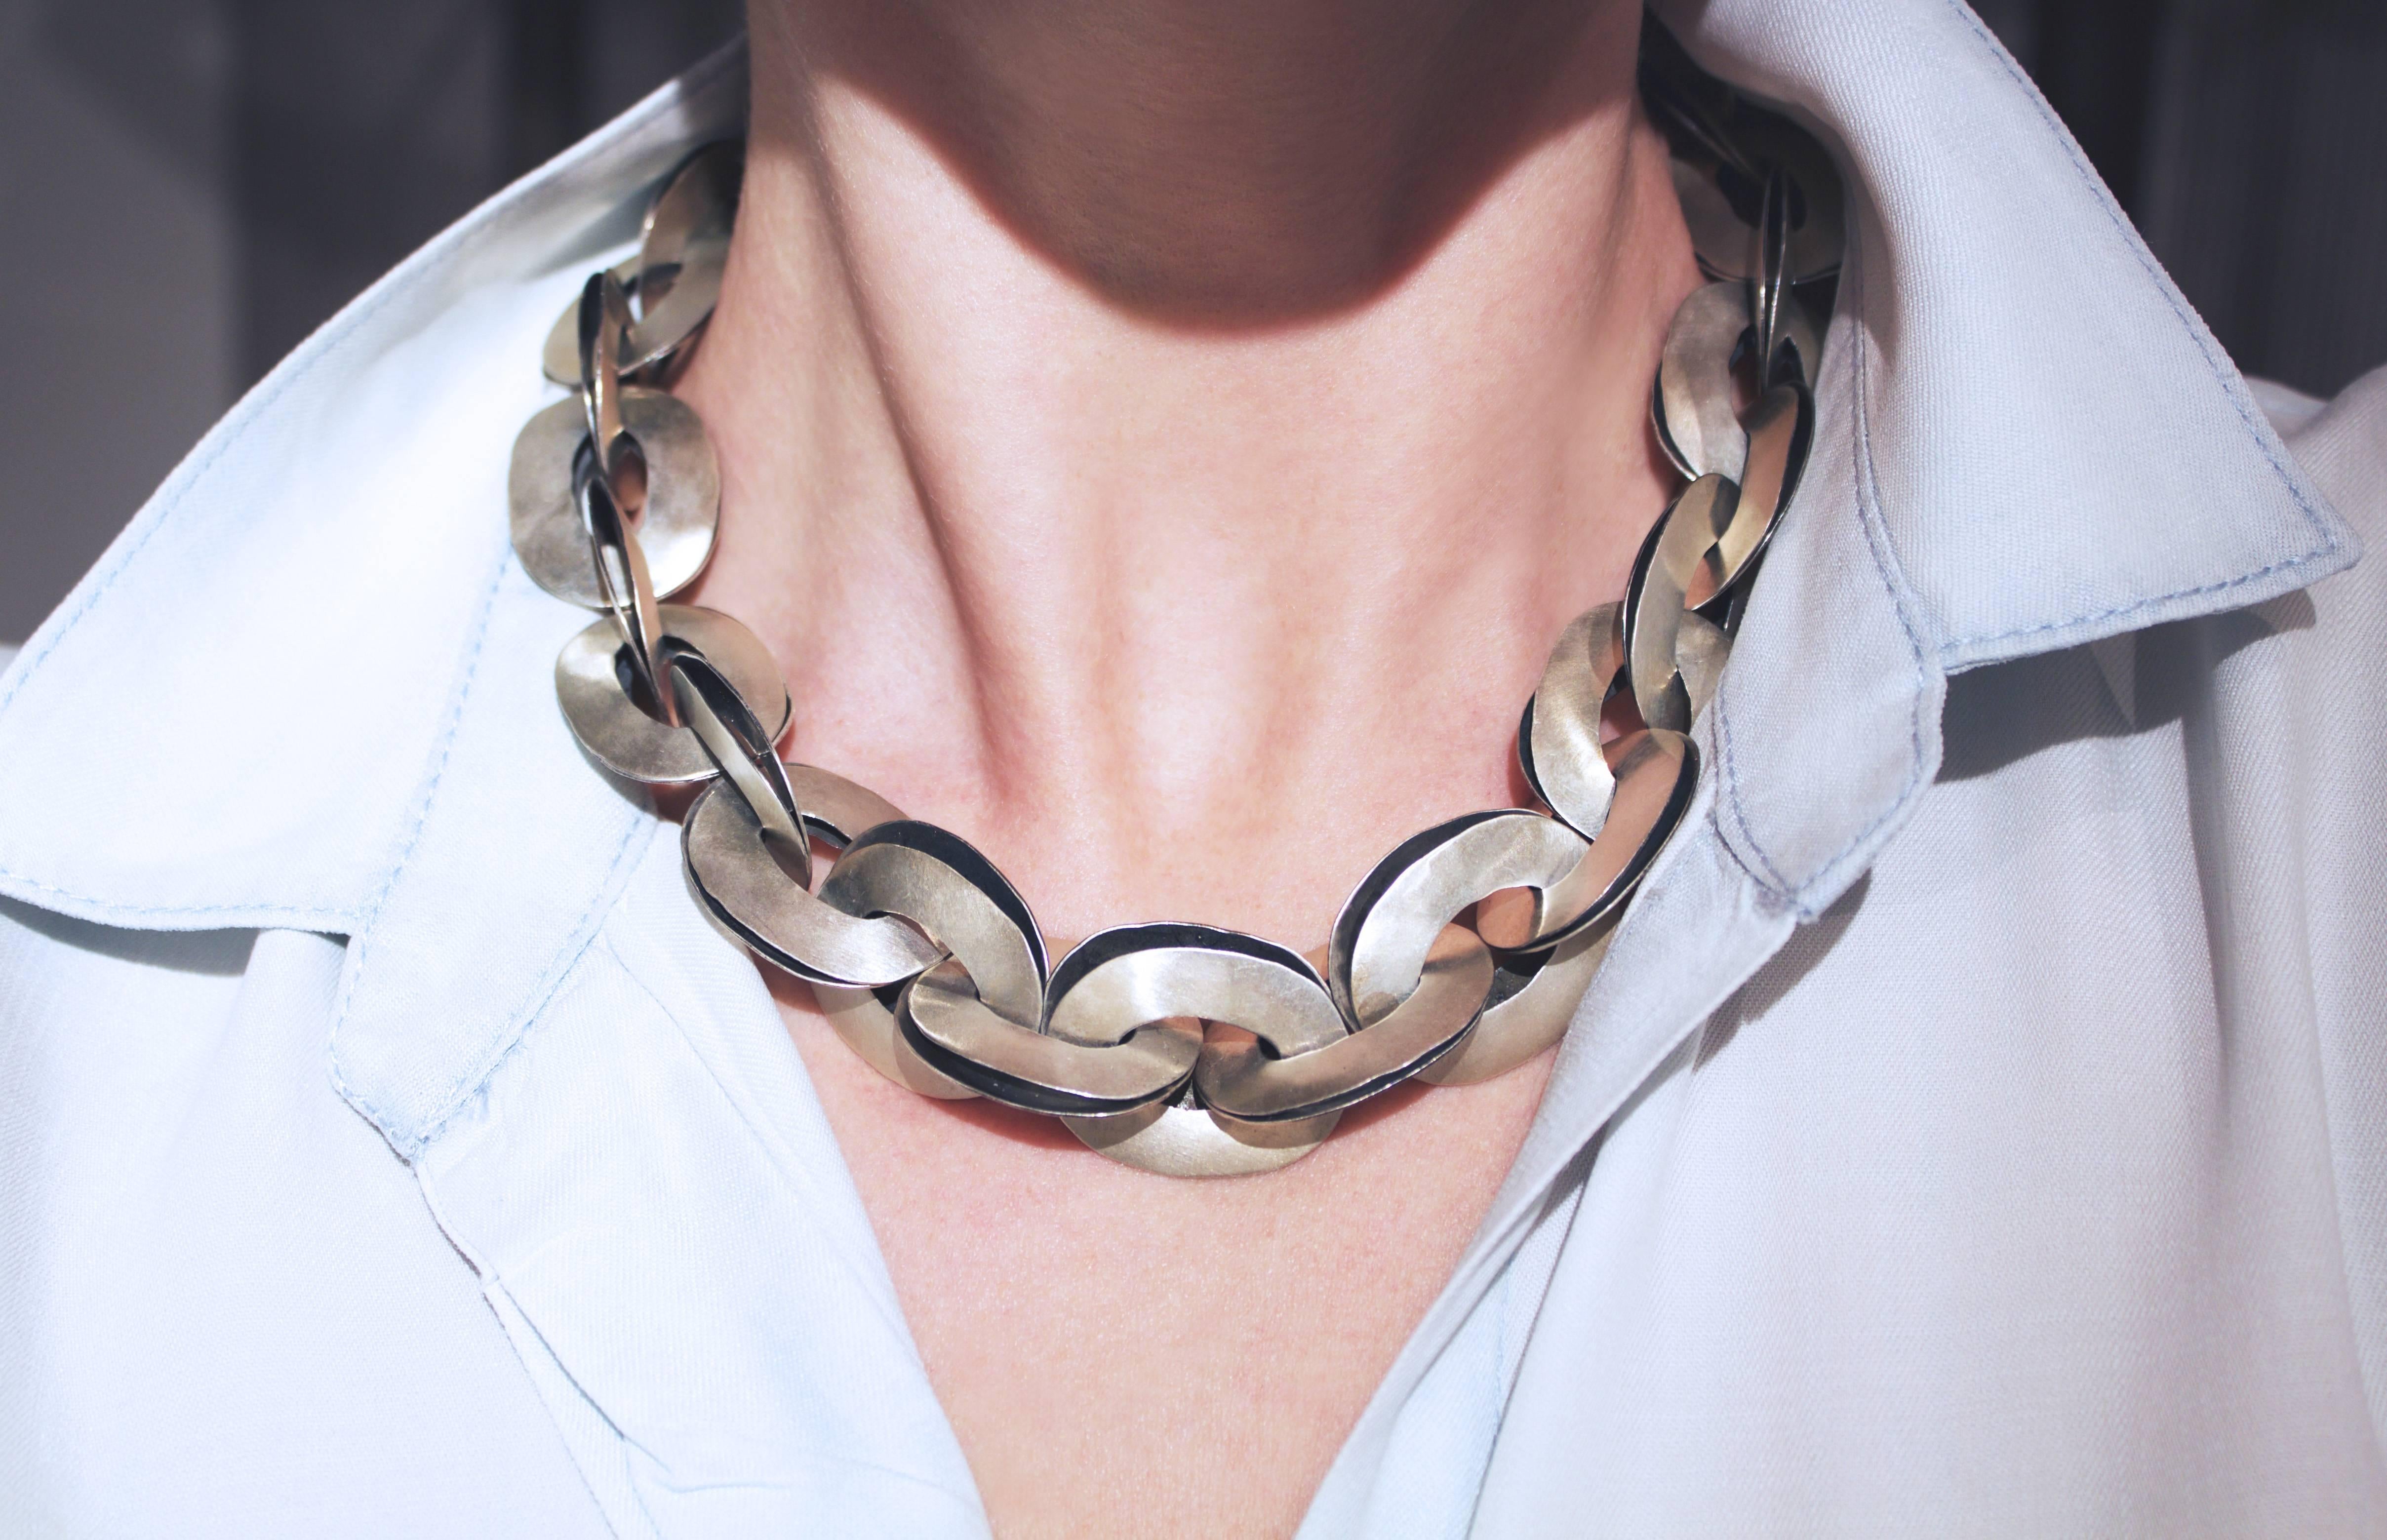 Double Link Chain Necklace handmade by renowned jewelry artist John Iversen featuring stacked and interlocked large oval links with a hammered and matte-finished exterior and an oxidized silver interior. The doubles-sided handmade silver closure is